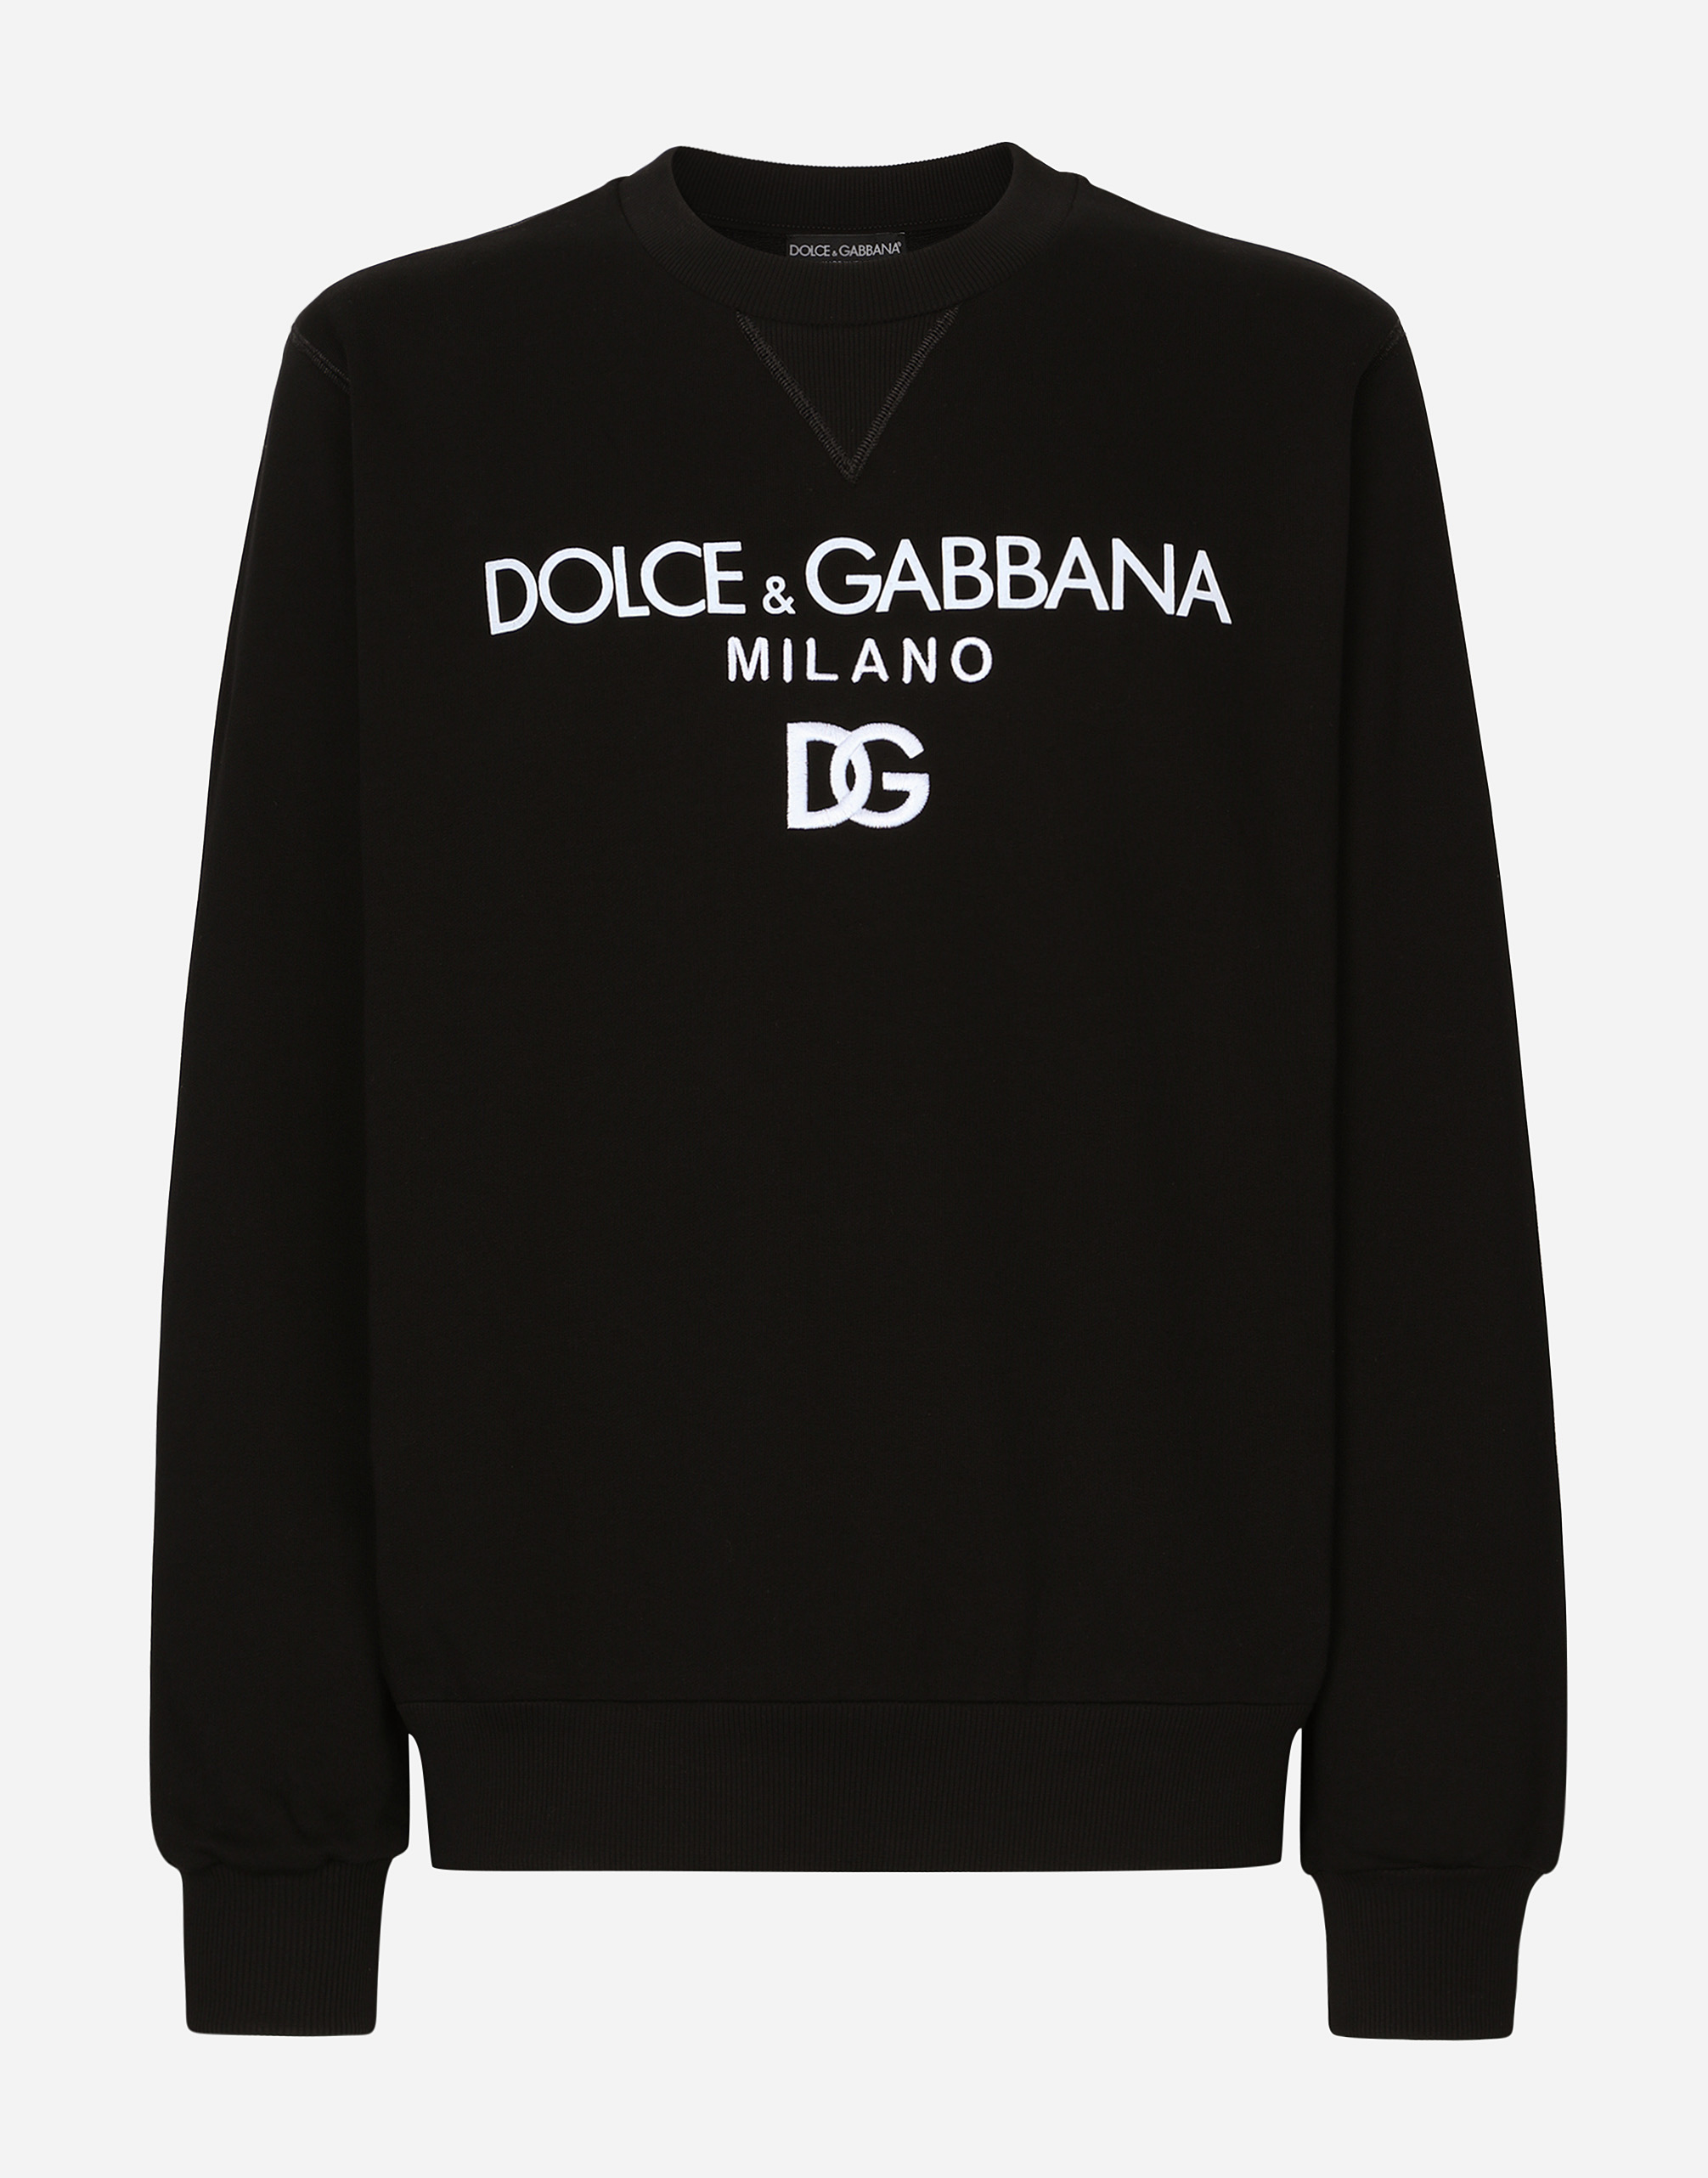 Dolce & Gabbana Jersey Sweatshirt With Dg Embroidery In Black